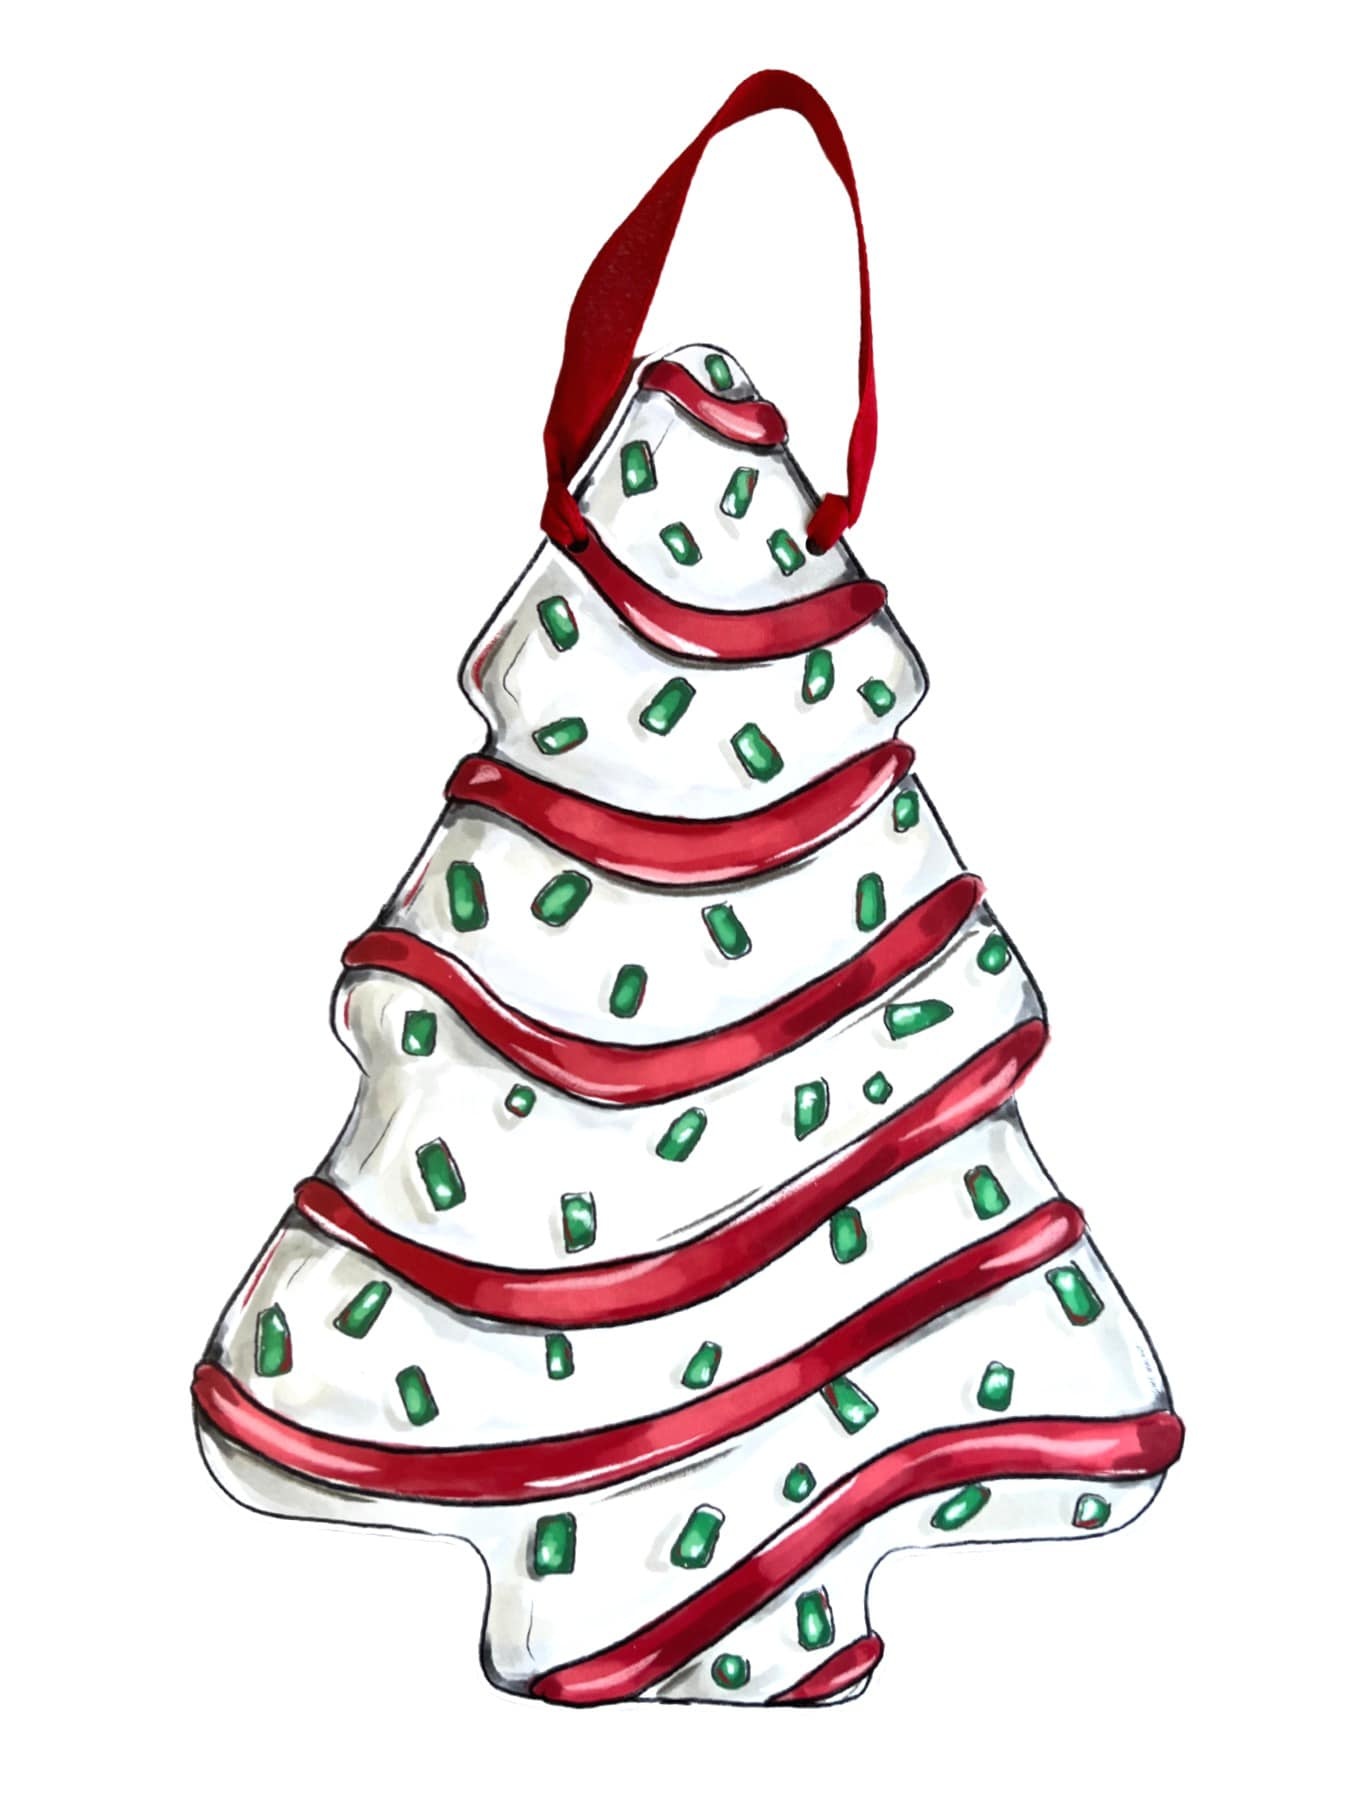 Sketch of a Christmas cake I made with my daughter by Josm87 on DeviantArt